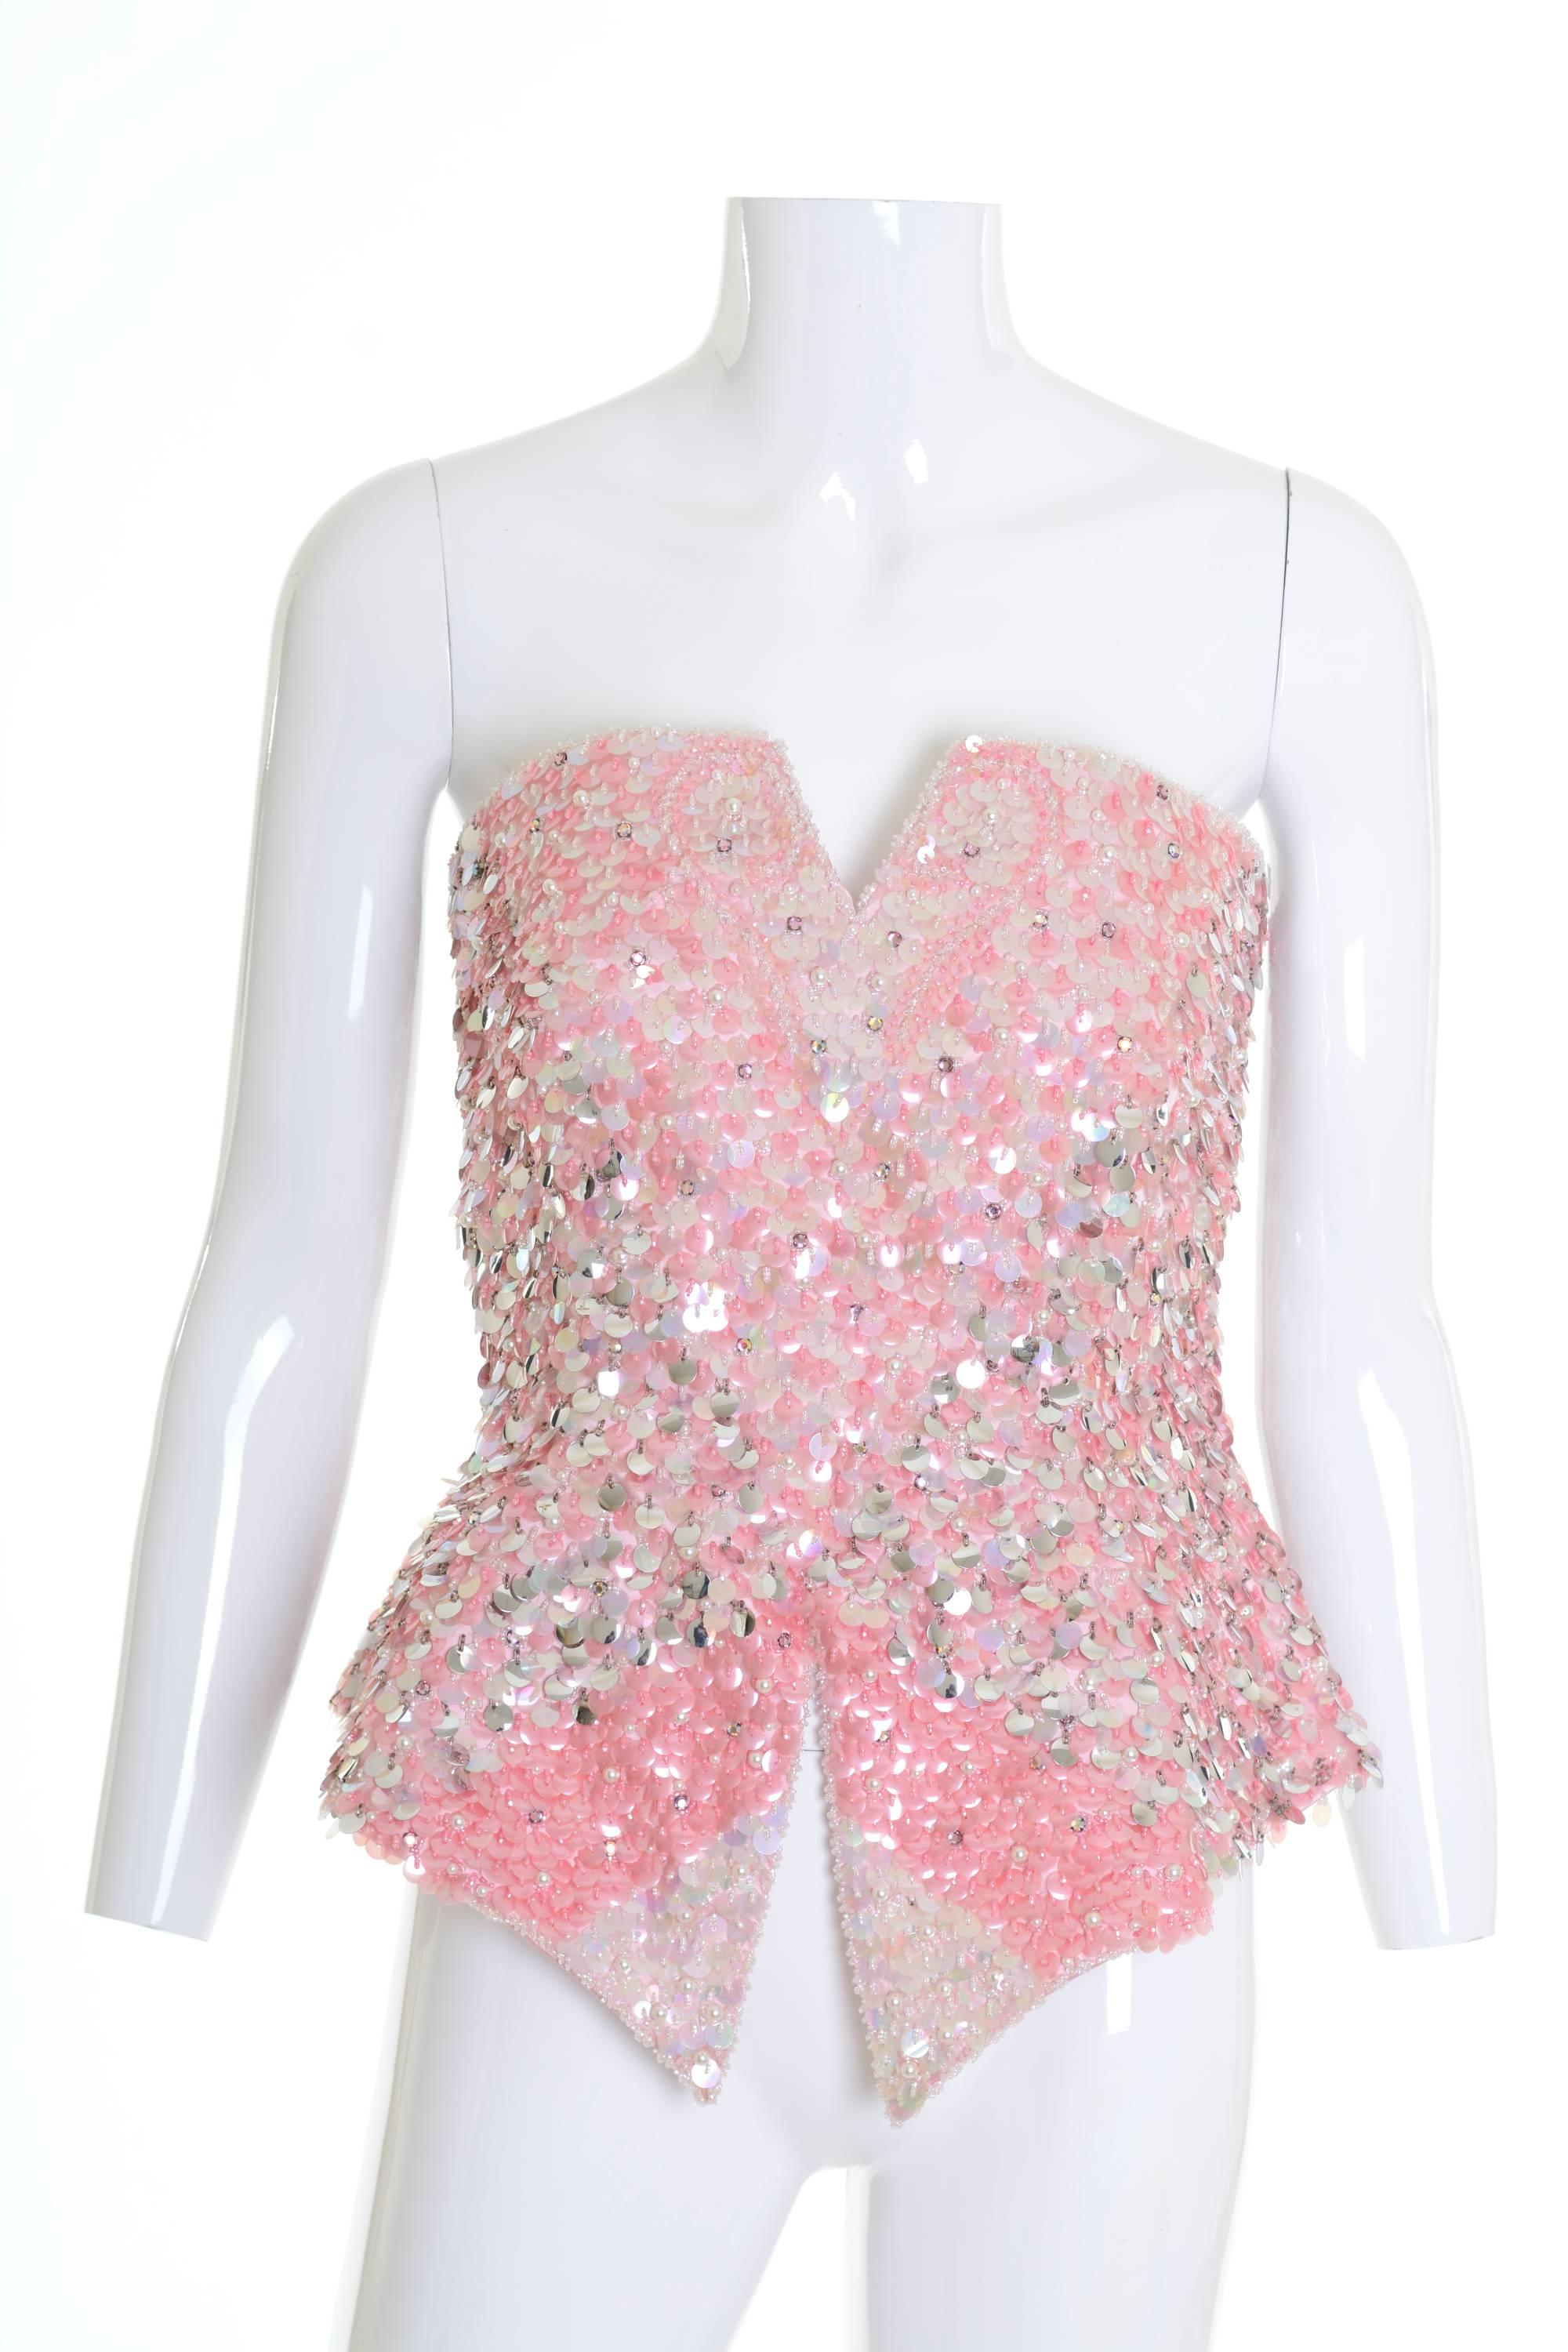 1980s bustier in a silk satin fabric covered with white, pink and silver sequins and seed beads, fully lined, boned bodice, side zip closure. 

Excellent Vintage Condition

Label: unknown
Fabric: silk
Colors: white, pink ,